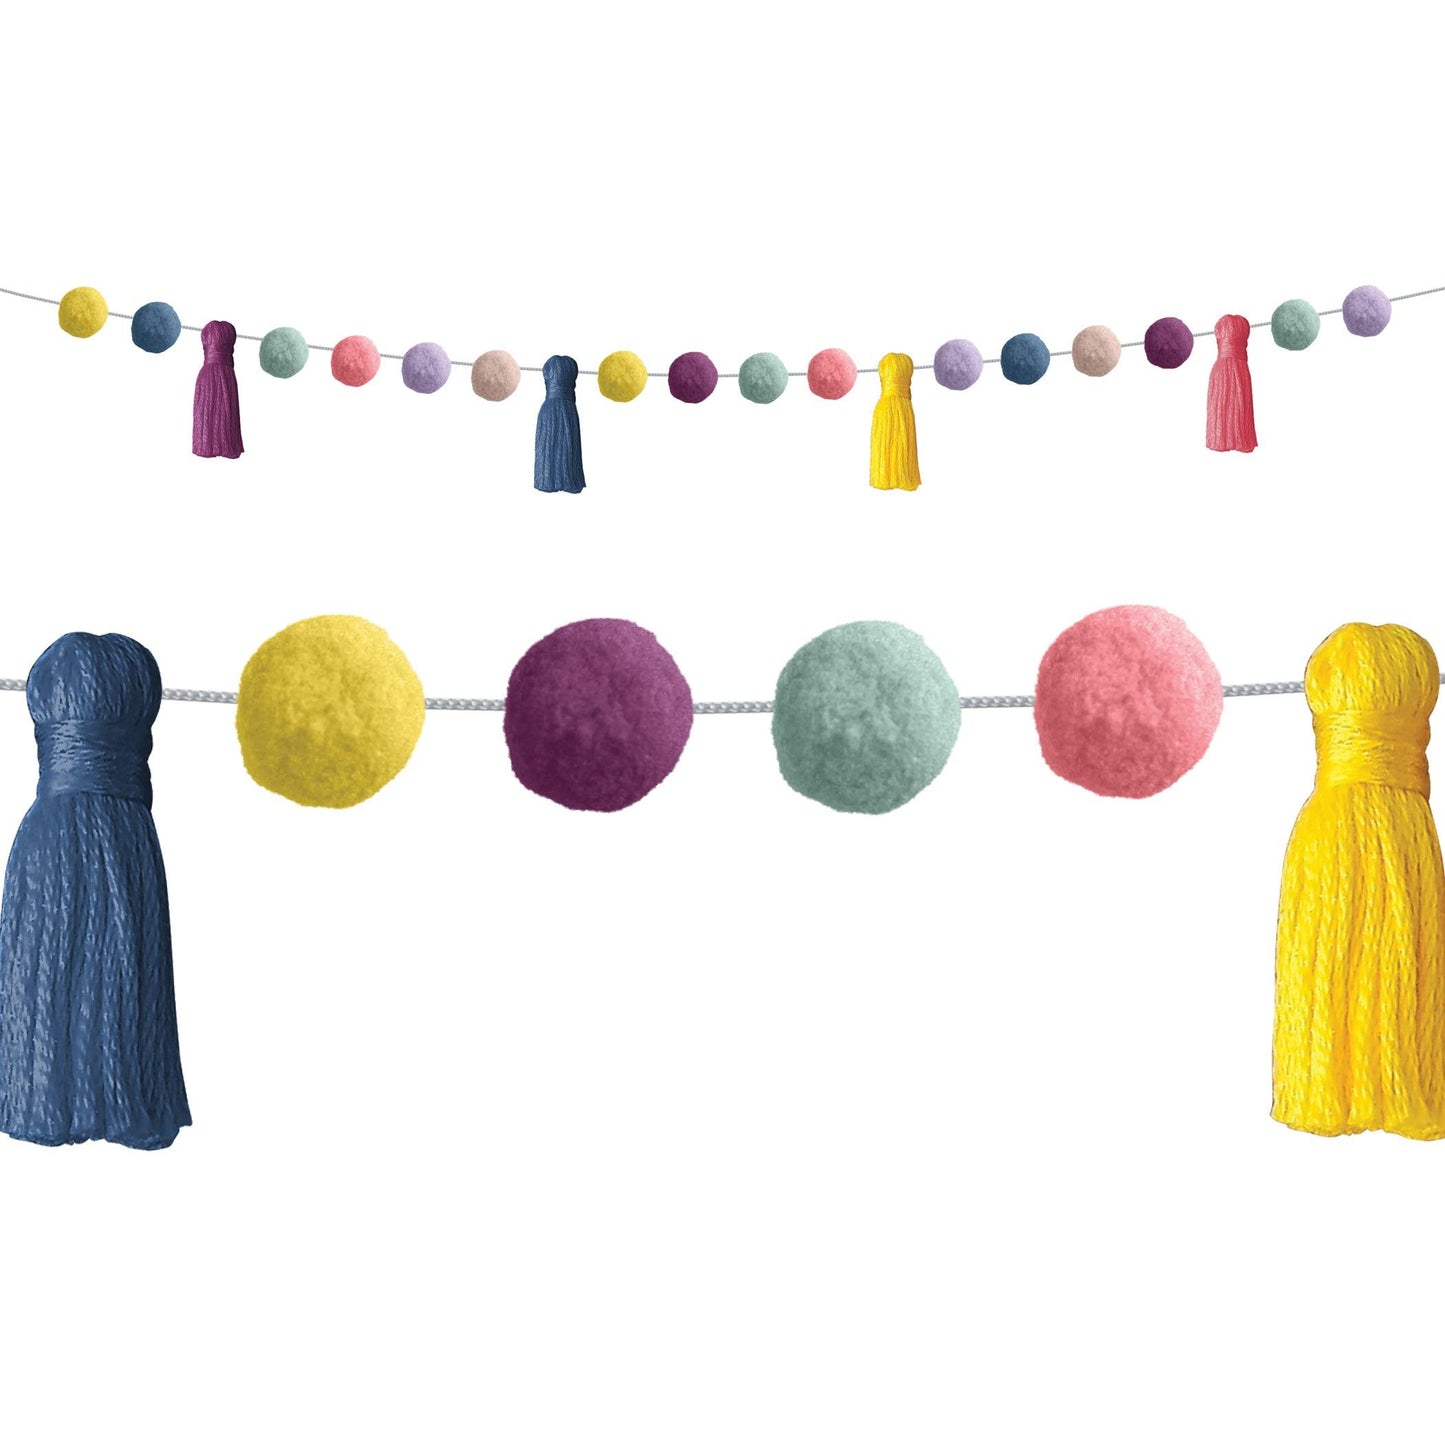 Pom-Poms and Tassels Garland, Pack of 3 - Loomini